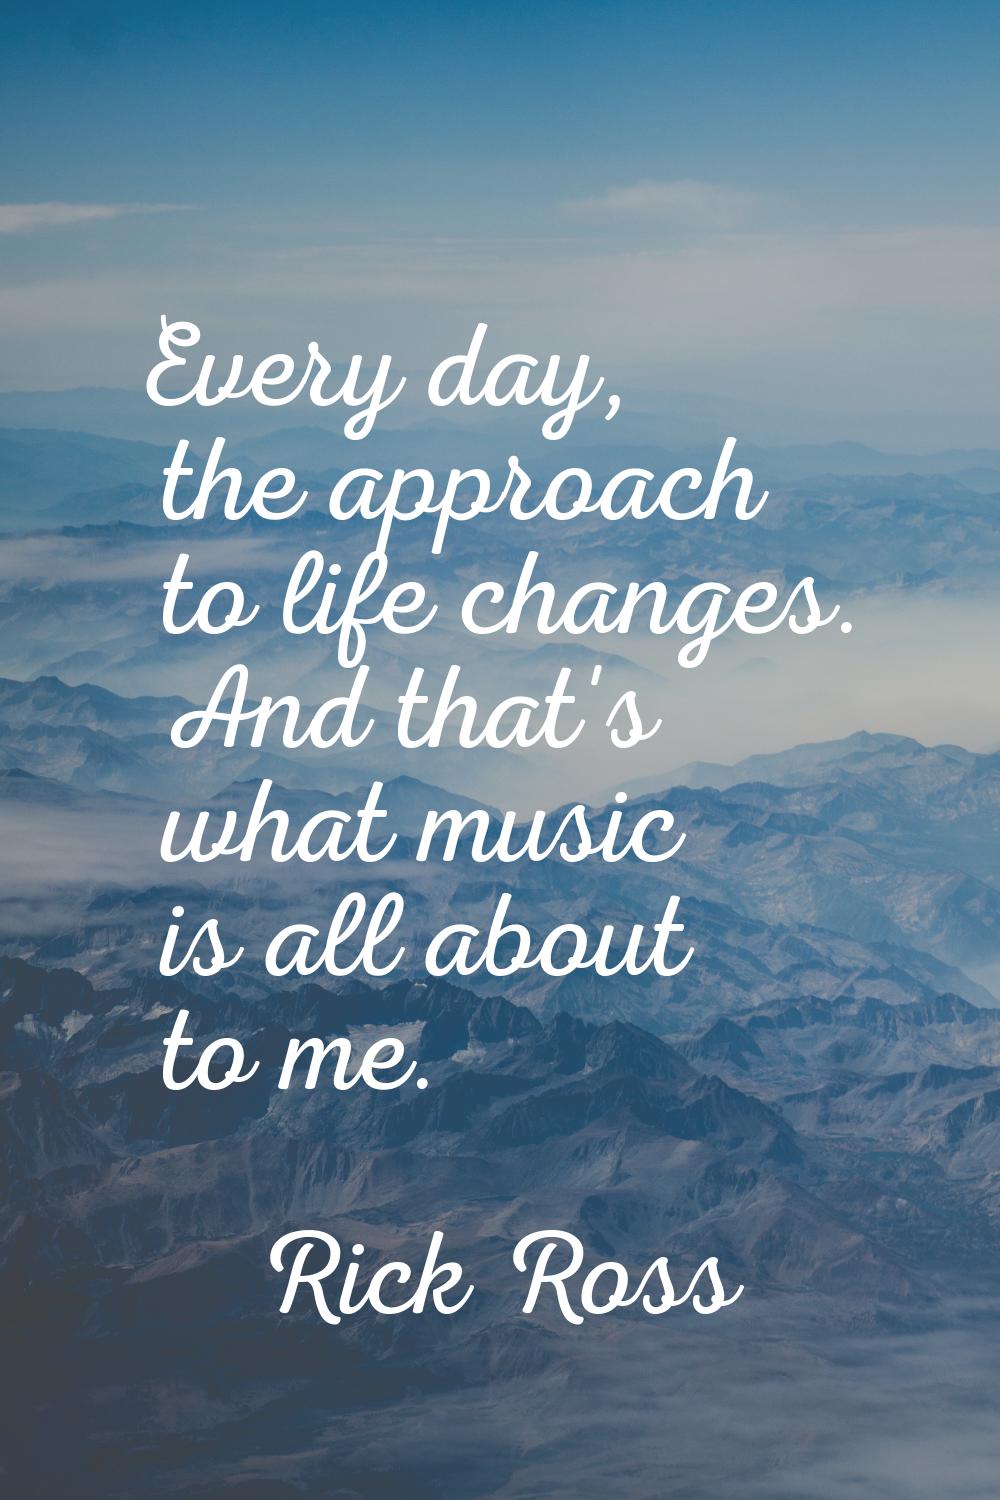 Every day, the approach to life changes. And that's what music is all about to me.